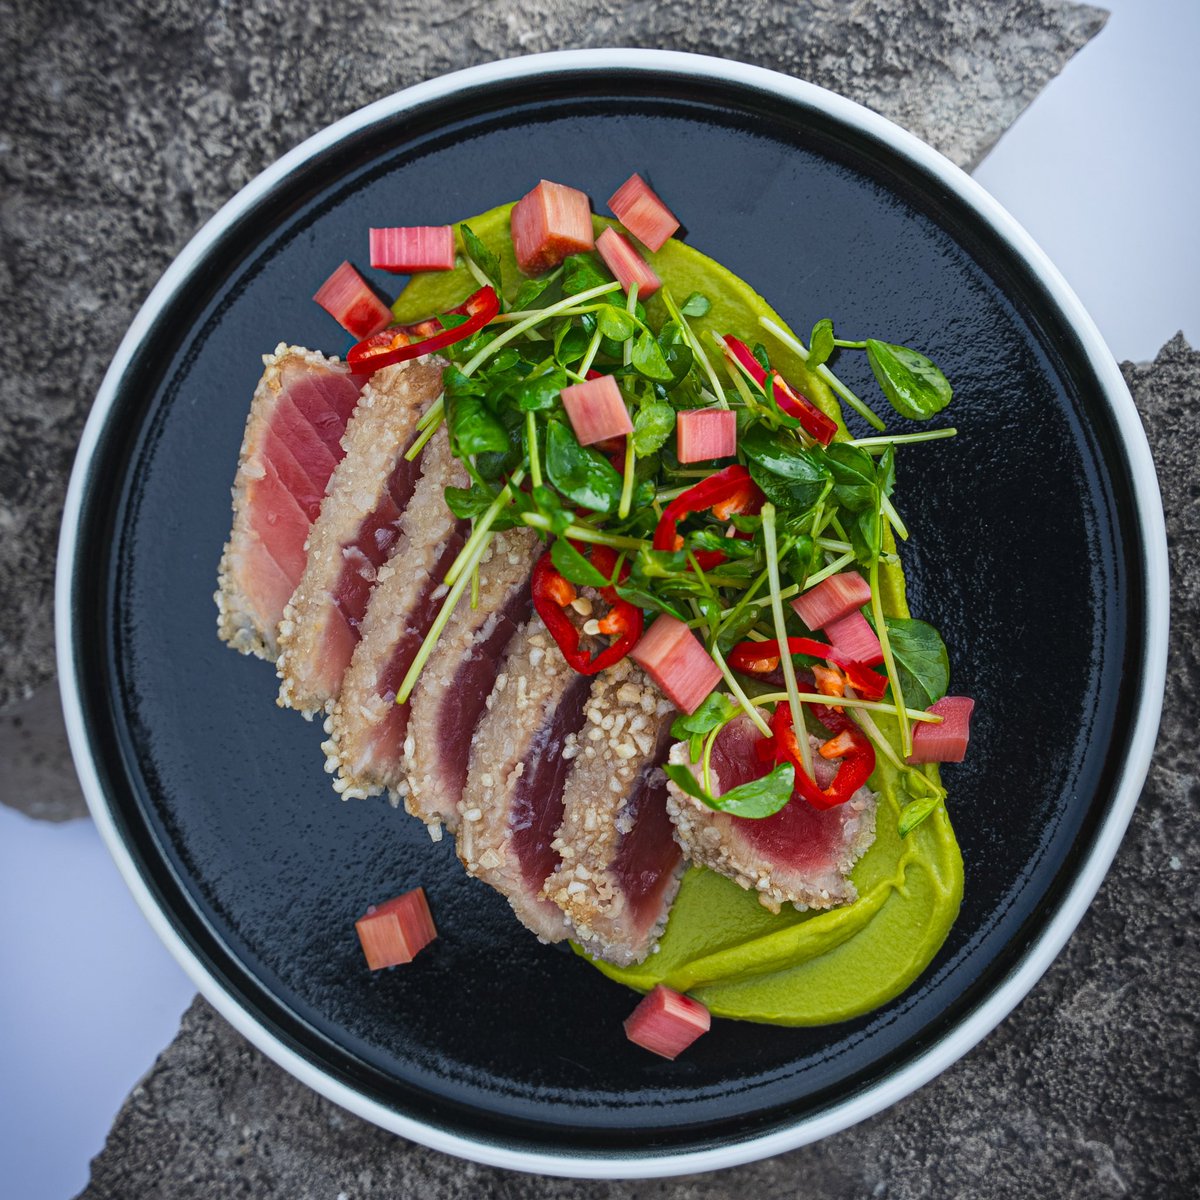 From our spring menu:

Tuna: With a crispy rice crust, nestled in miso pea puree, with accents of pickled rhubarb and fresno chile.

#gorockford #finedining #rockfordil